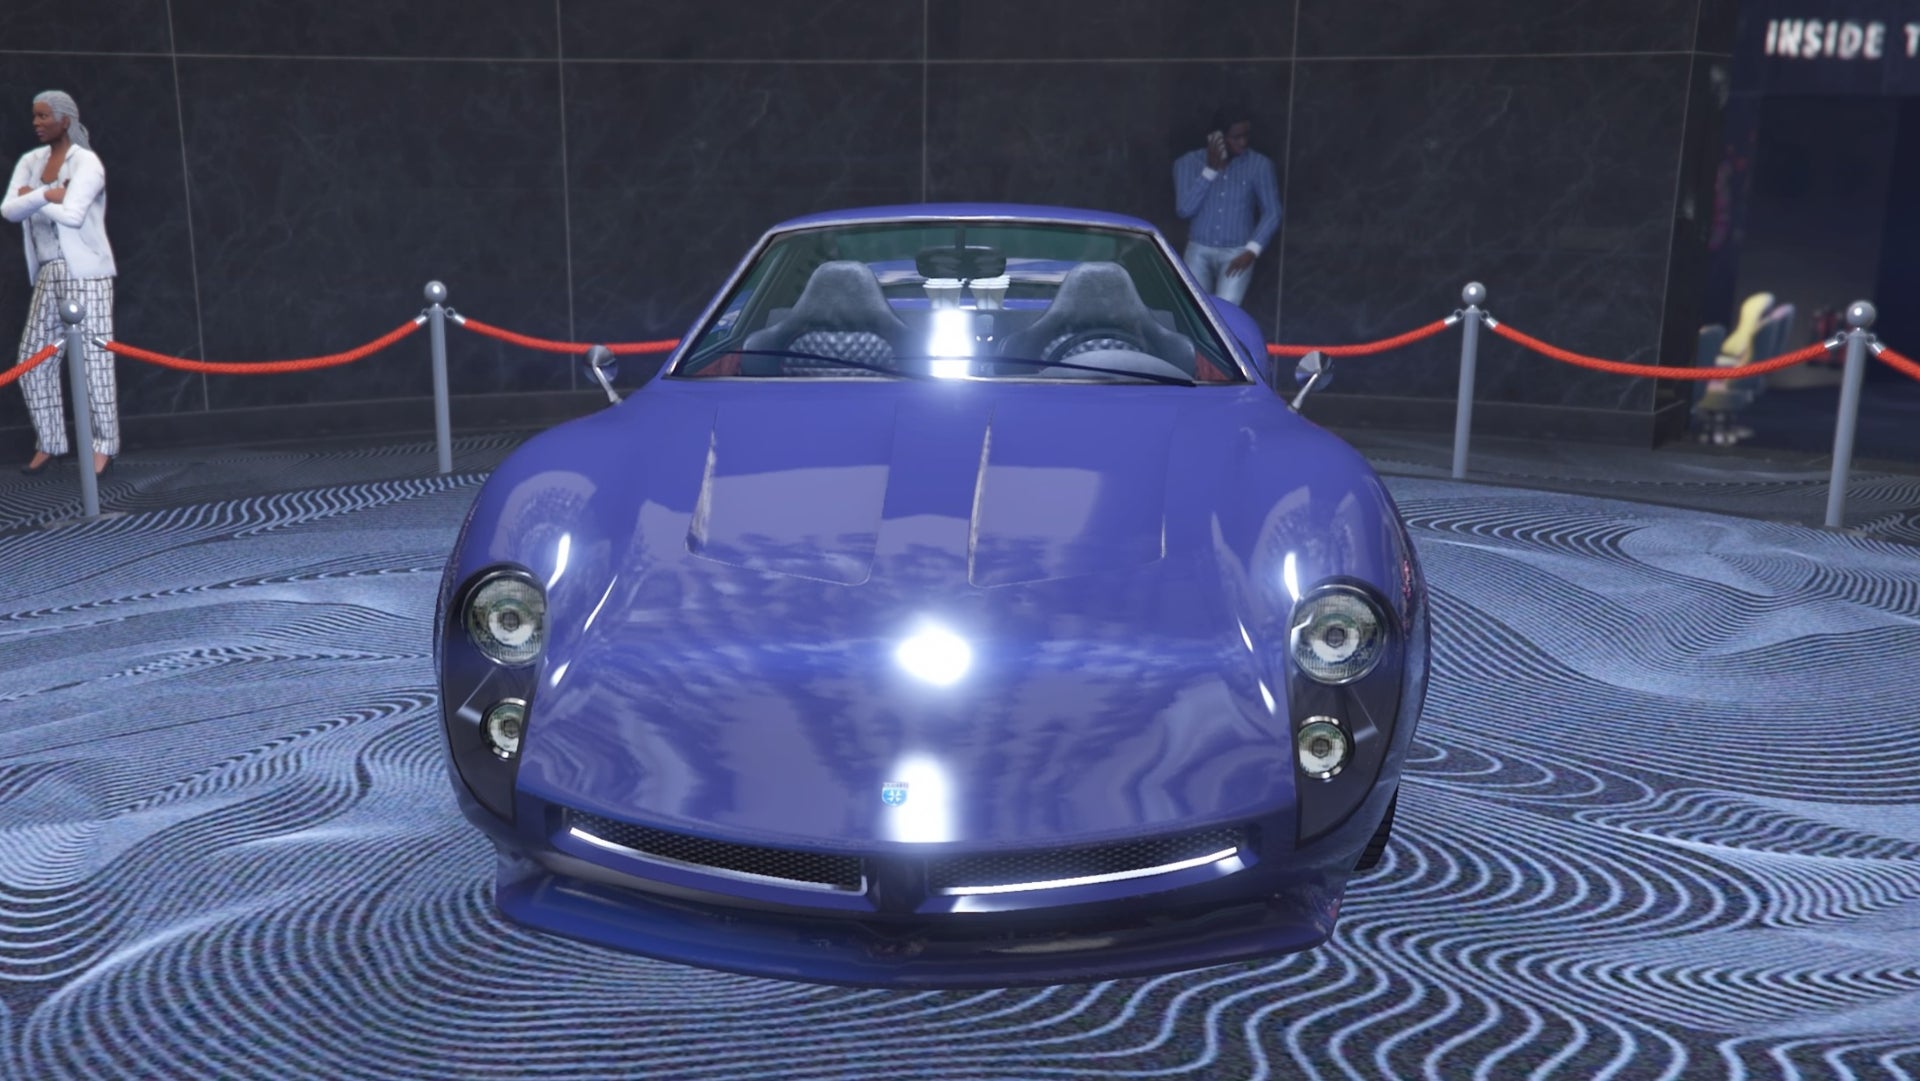 GTA Online, a front view of a blue Stinger GT